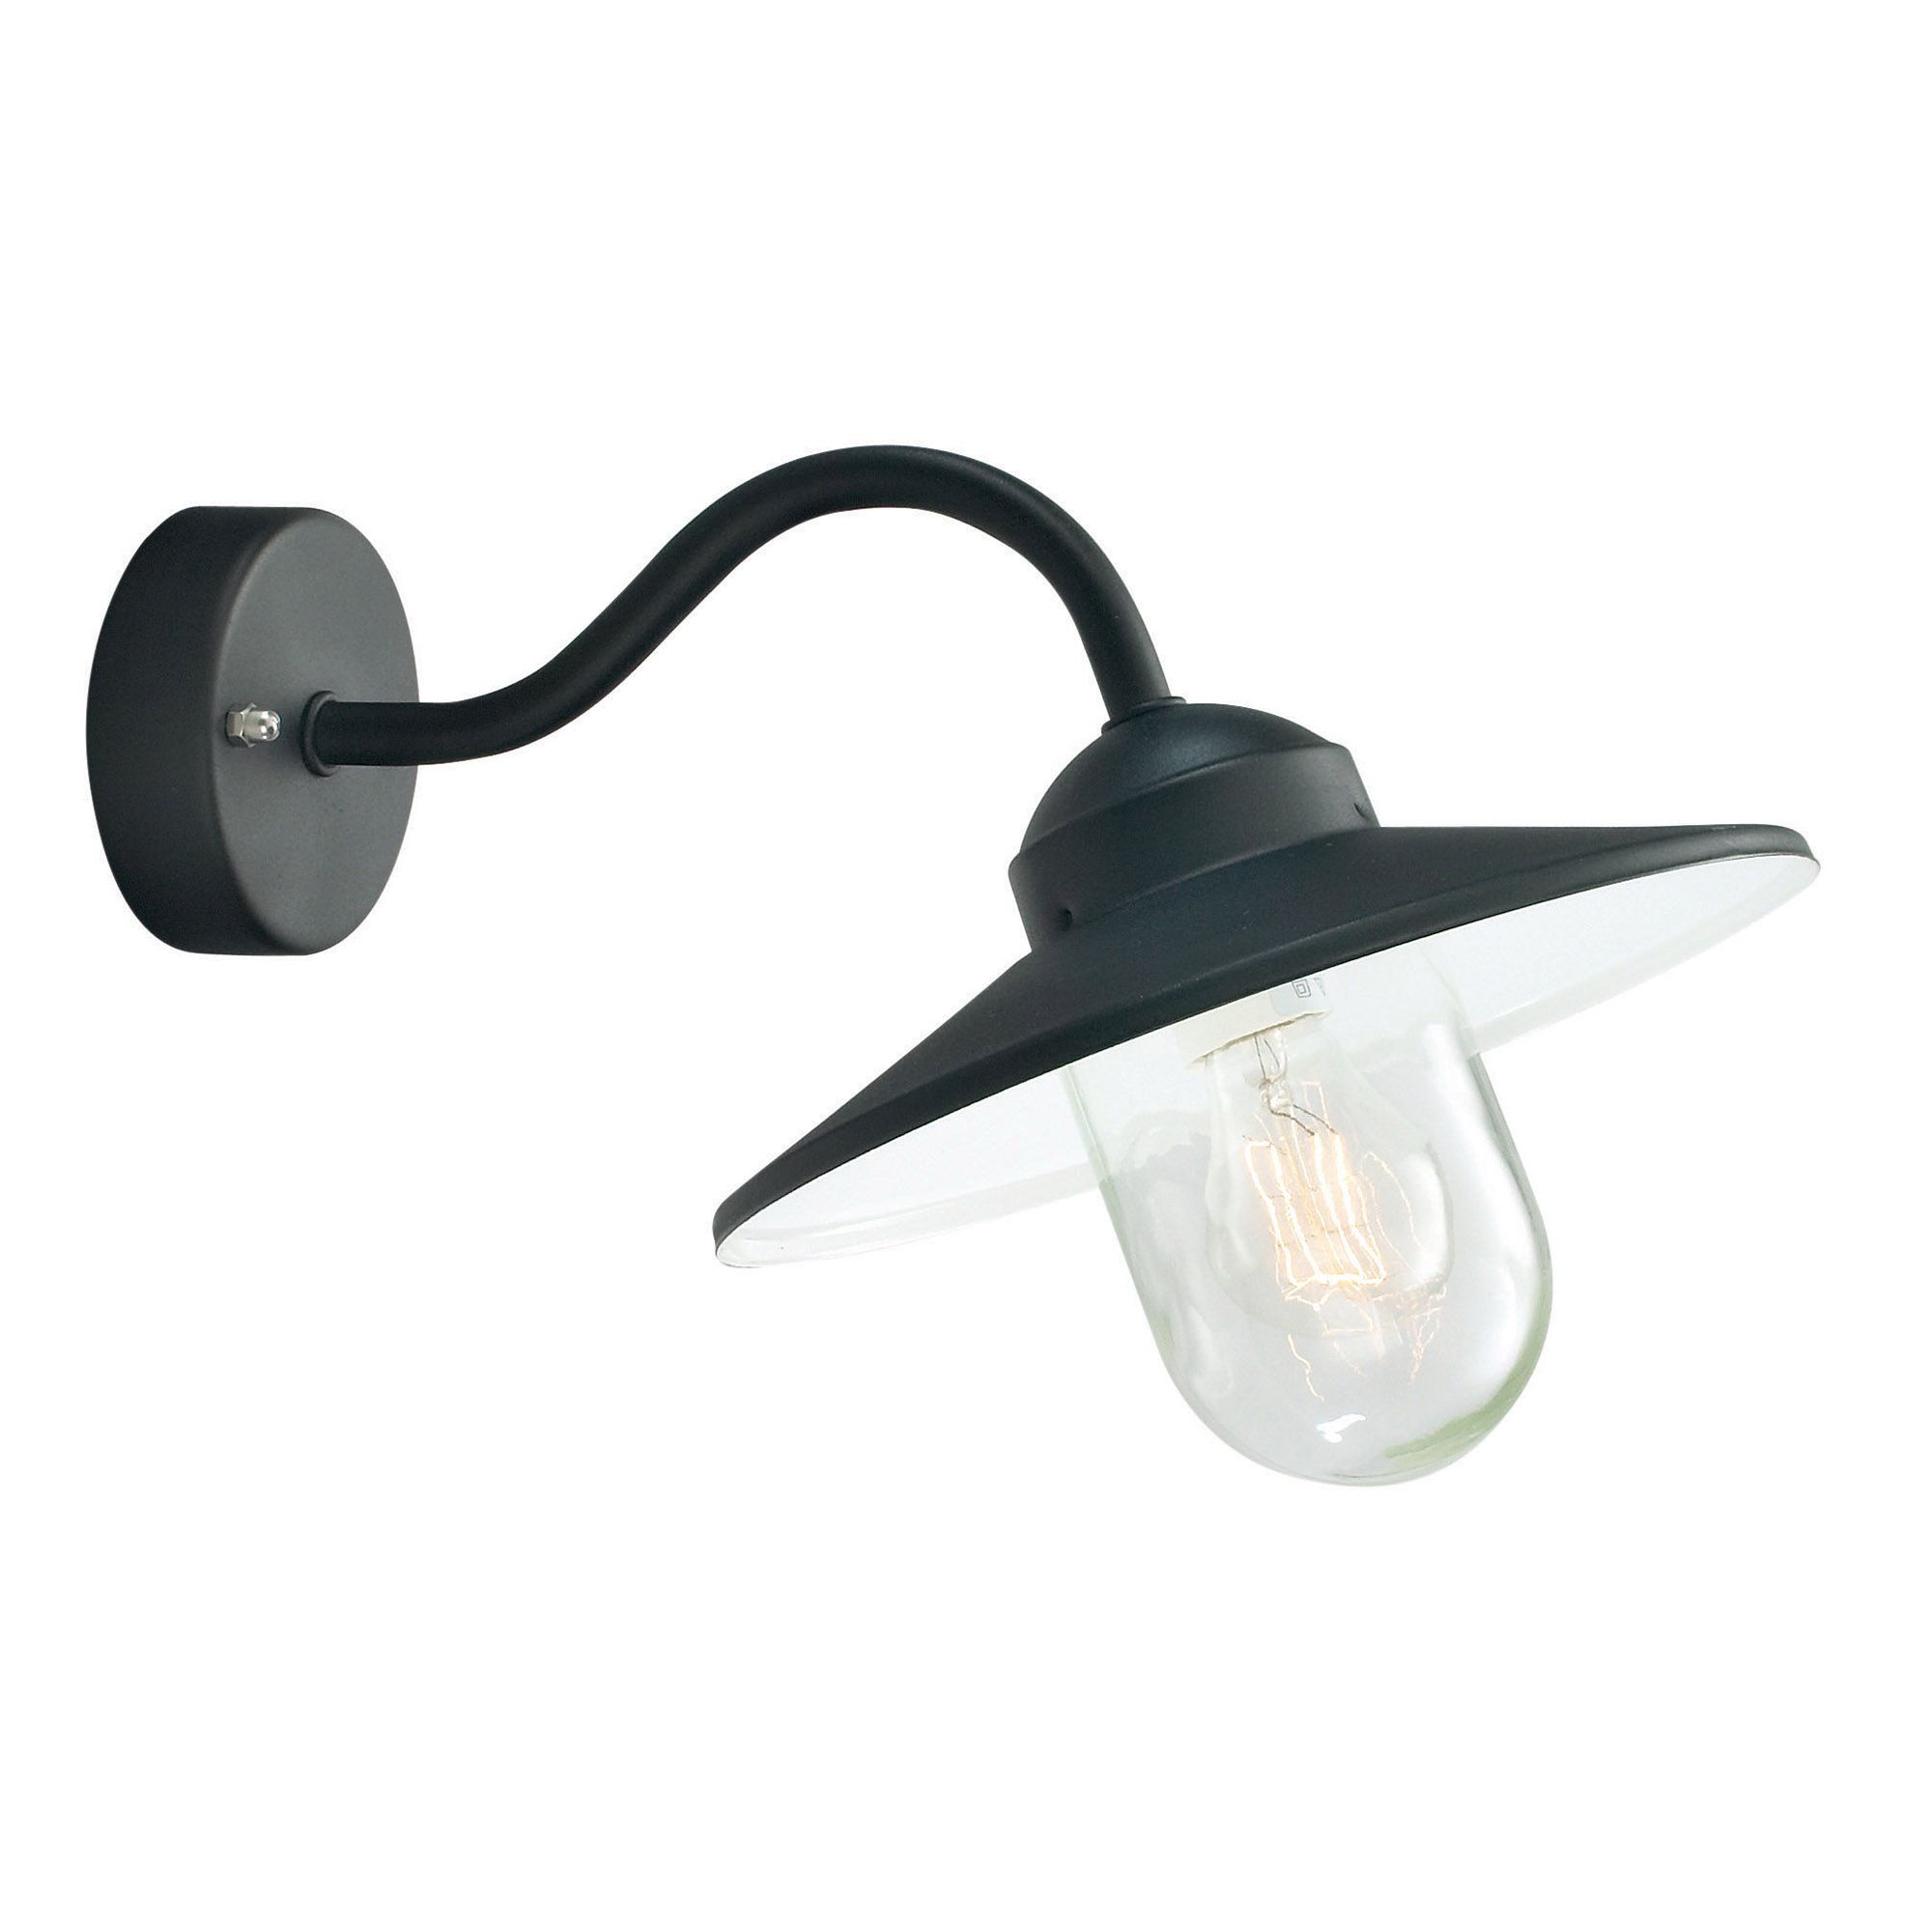 1 ONLY Elstead Norlys KARLSTAD Black Outdoor Wall Light